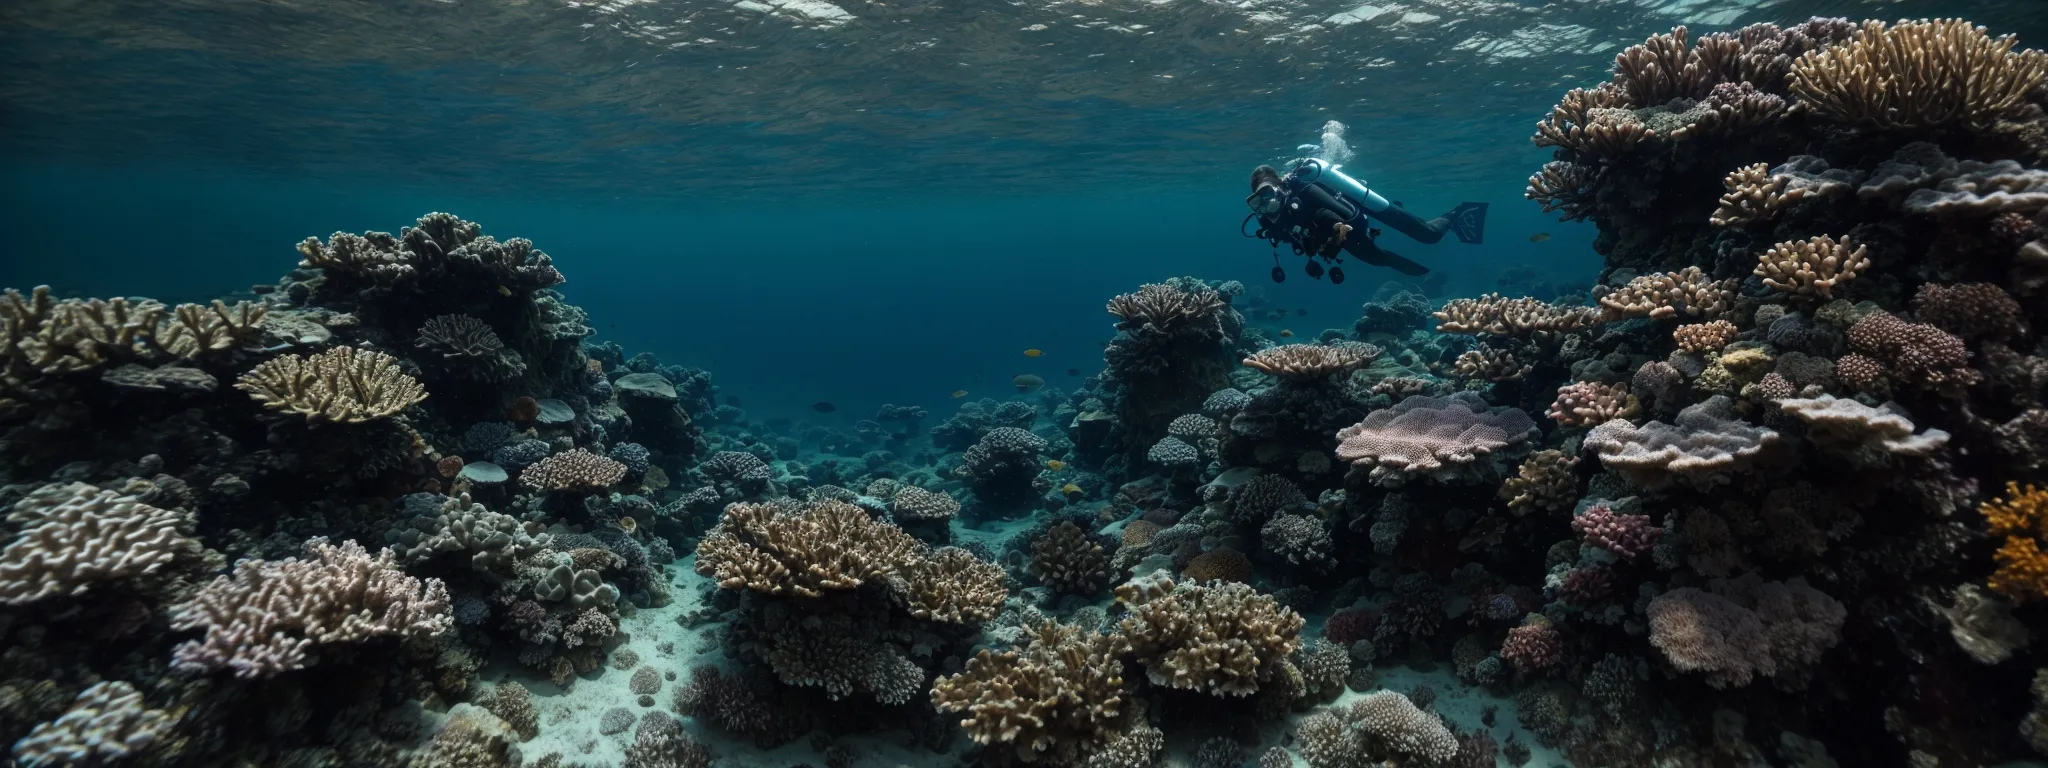 a diver poised above a coral reef, ready to plunge into the underwater world, symbolizing the dive into deep competitor analysis.